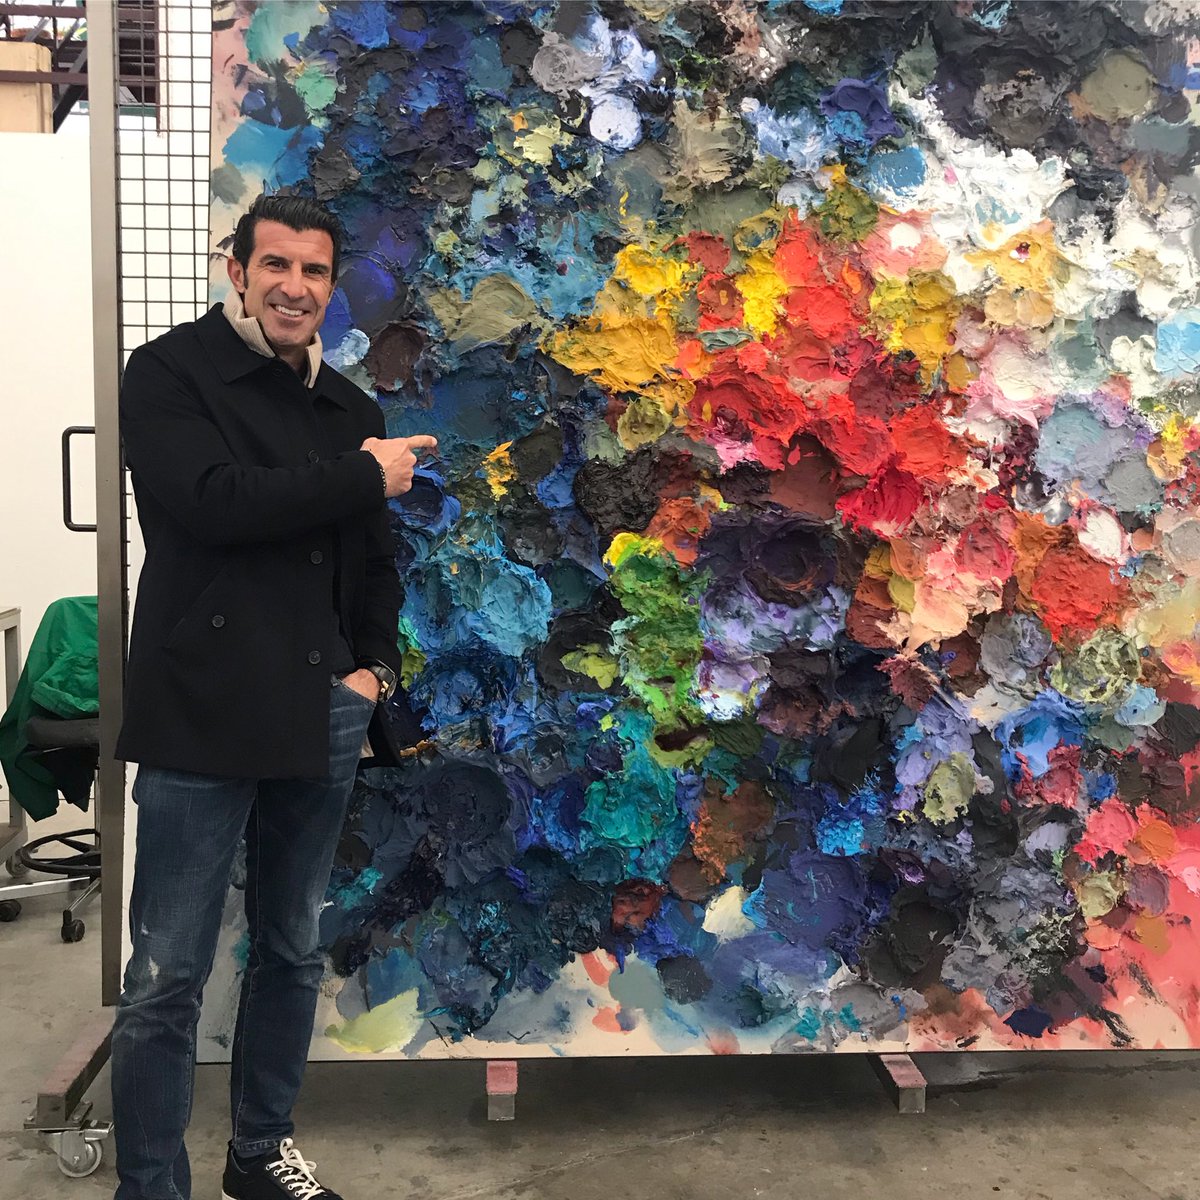 Great day visiting the atelier of a great painter and good friend #secundinohernandez  top👌👌🎨👨🏻‍🎨love the Art🤟🏼